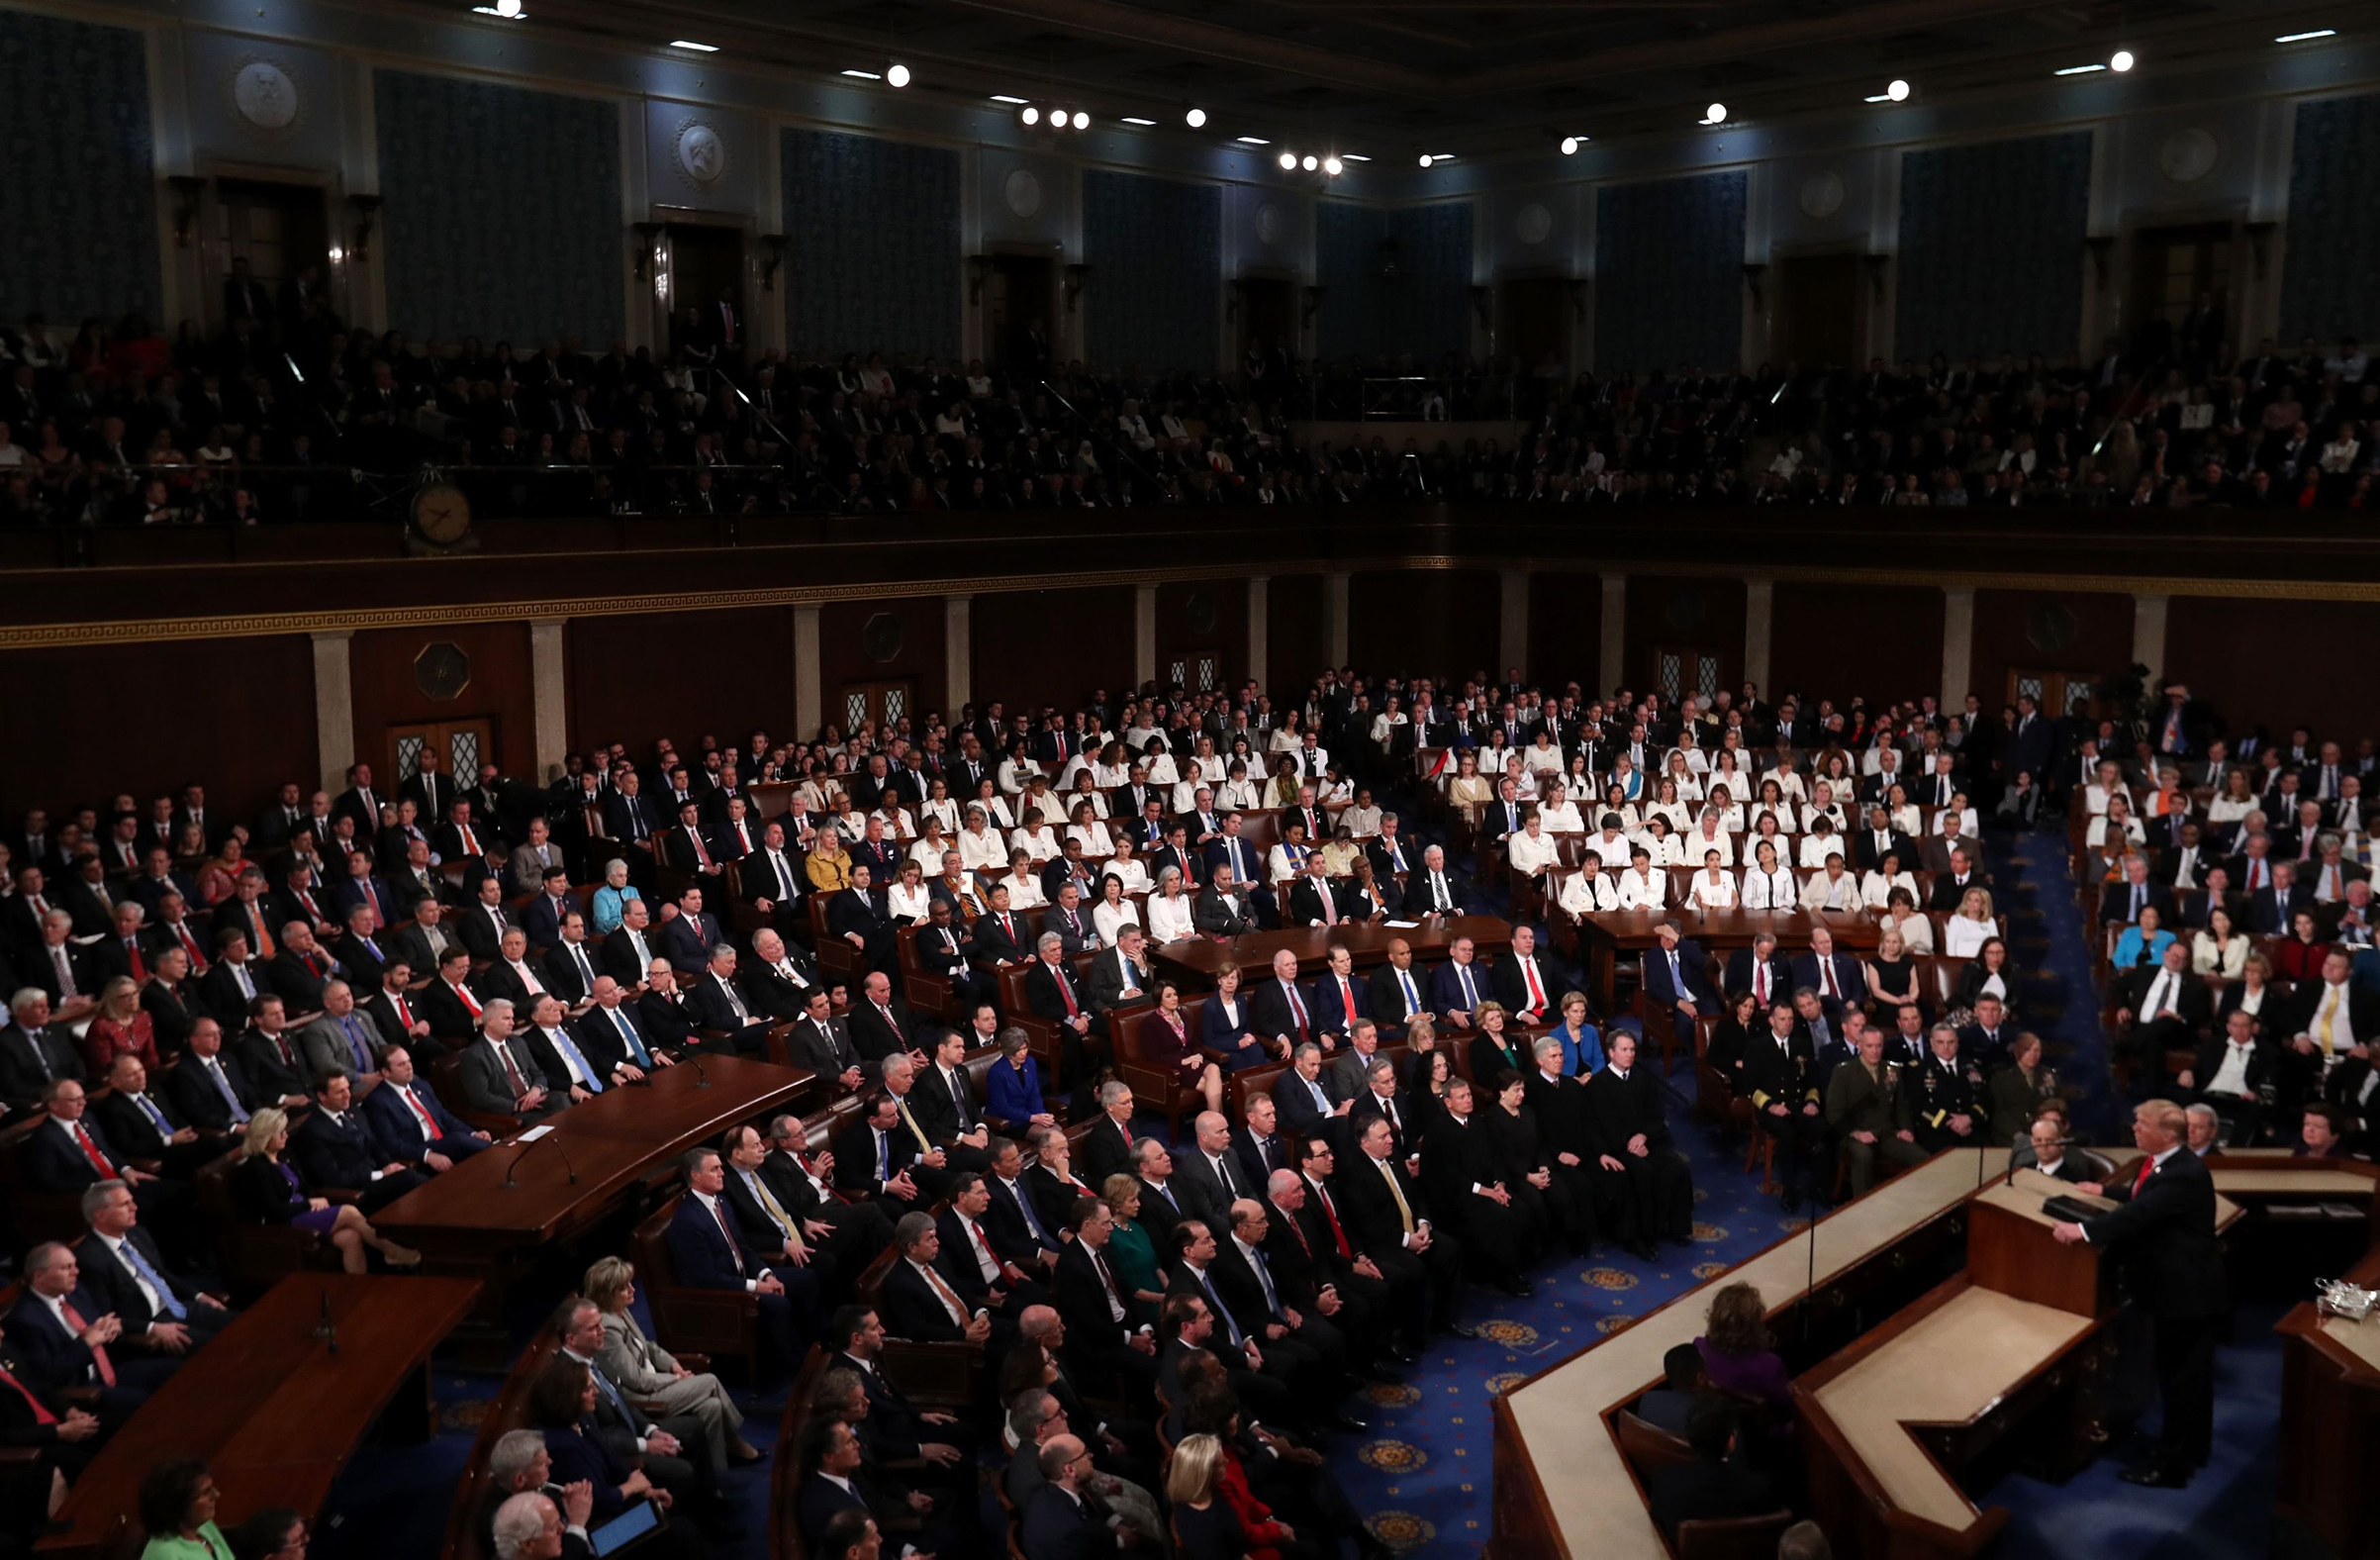 U.S. President Trump delivers his second State of the Union address to a joint session of the U.S. Congress in Washington